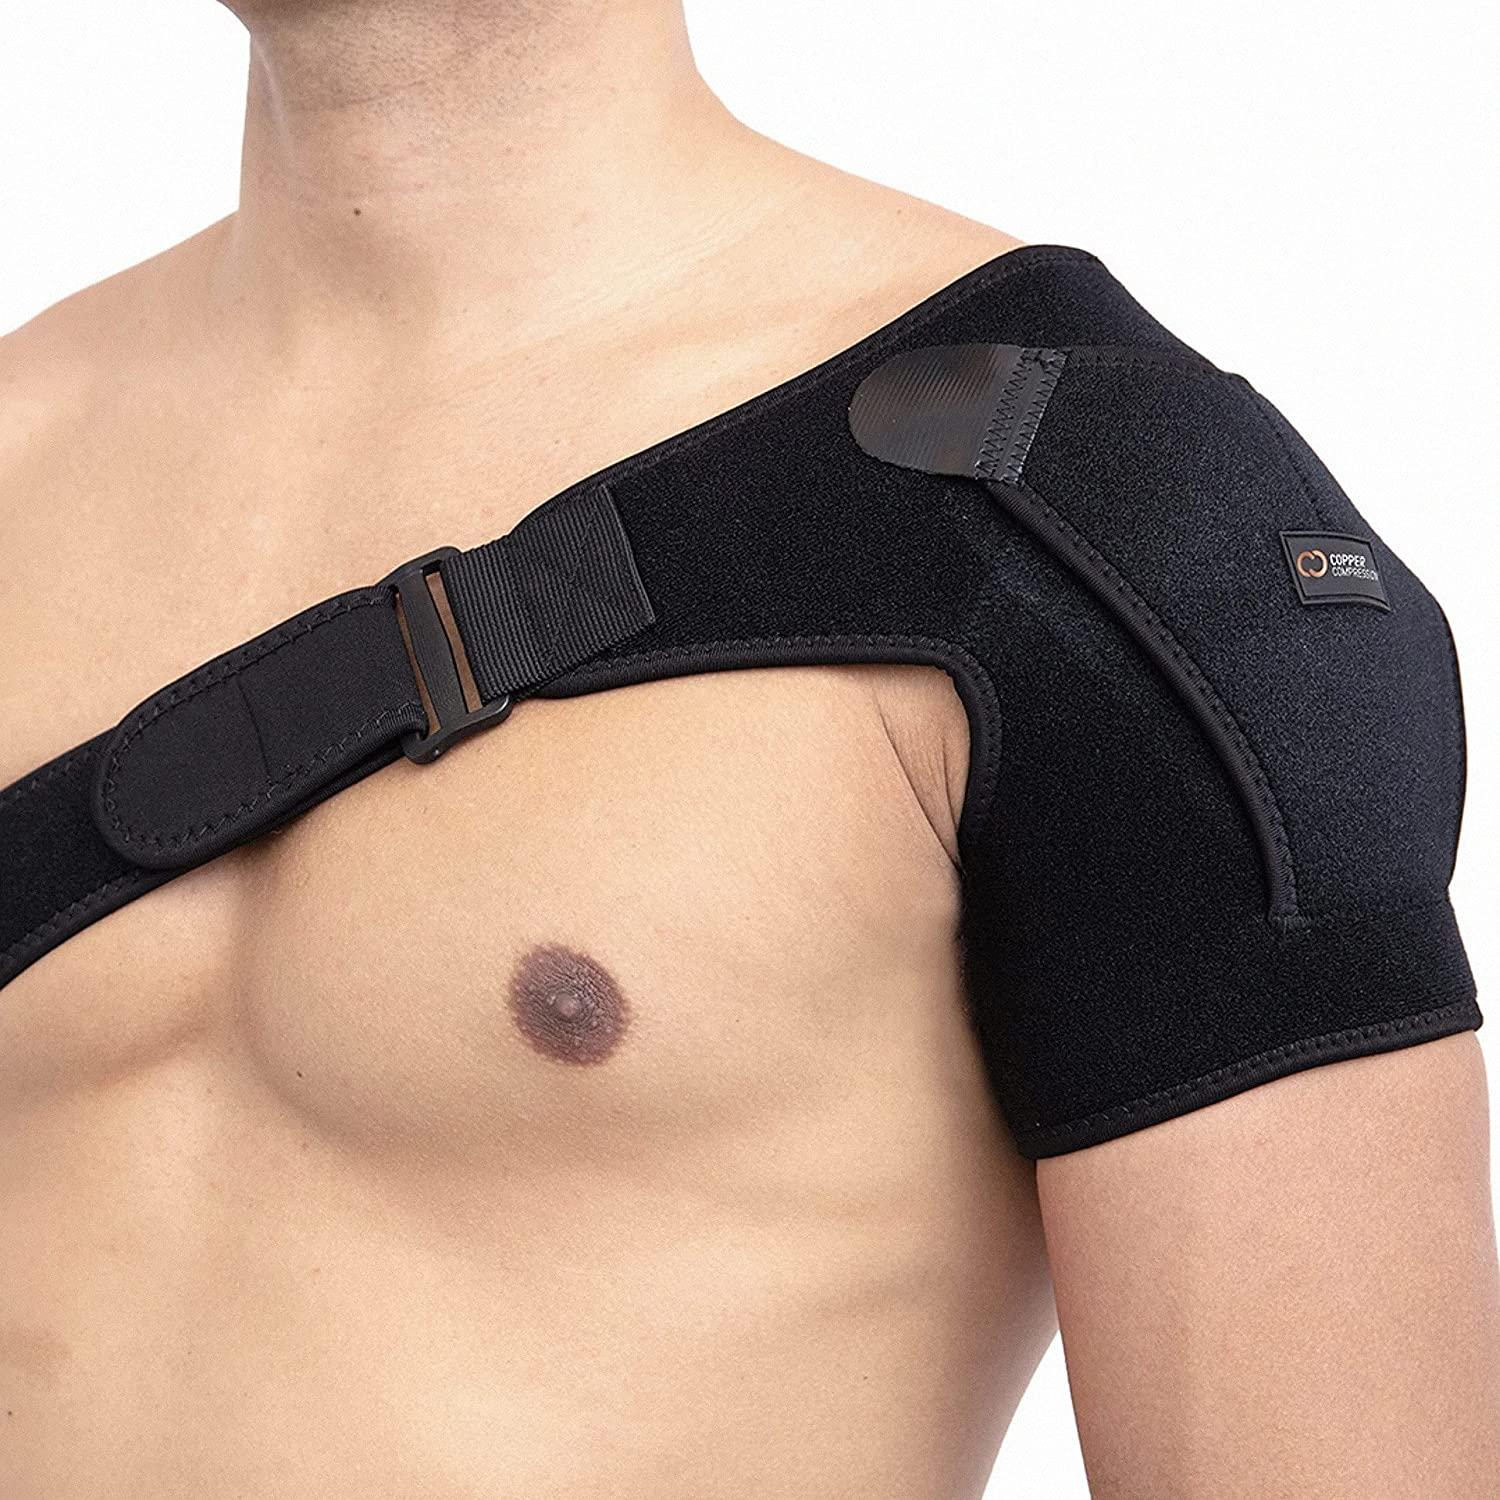 Shoulder Stability Brace - Injury Recovery Compression Support Sleeve - for  Rotator Cuff Injuries, Arthritis, Sprain, Dislocation, Joint Pain Relief